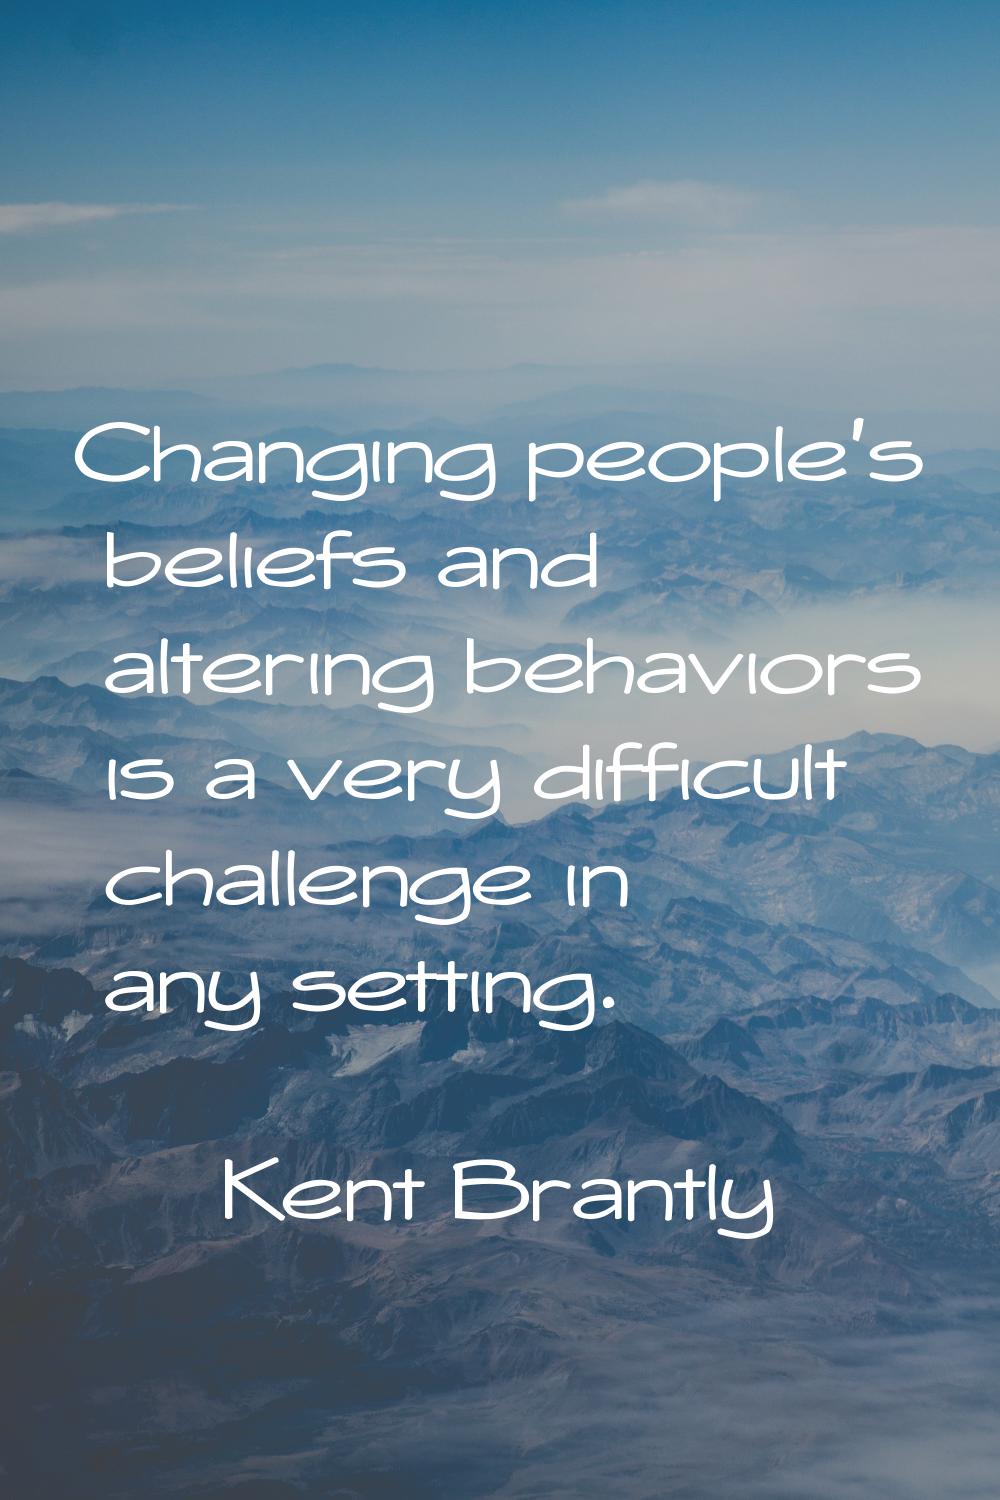 Changing people's beliefs and altering behaviors is a very difficult challenge in any setting.